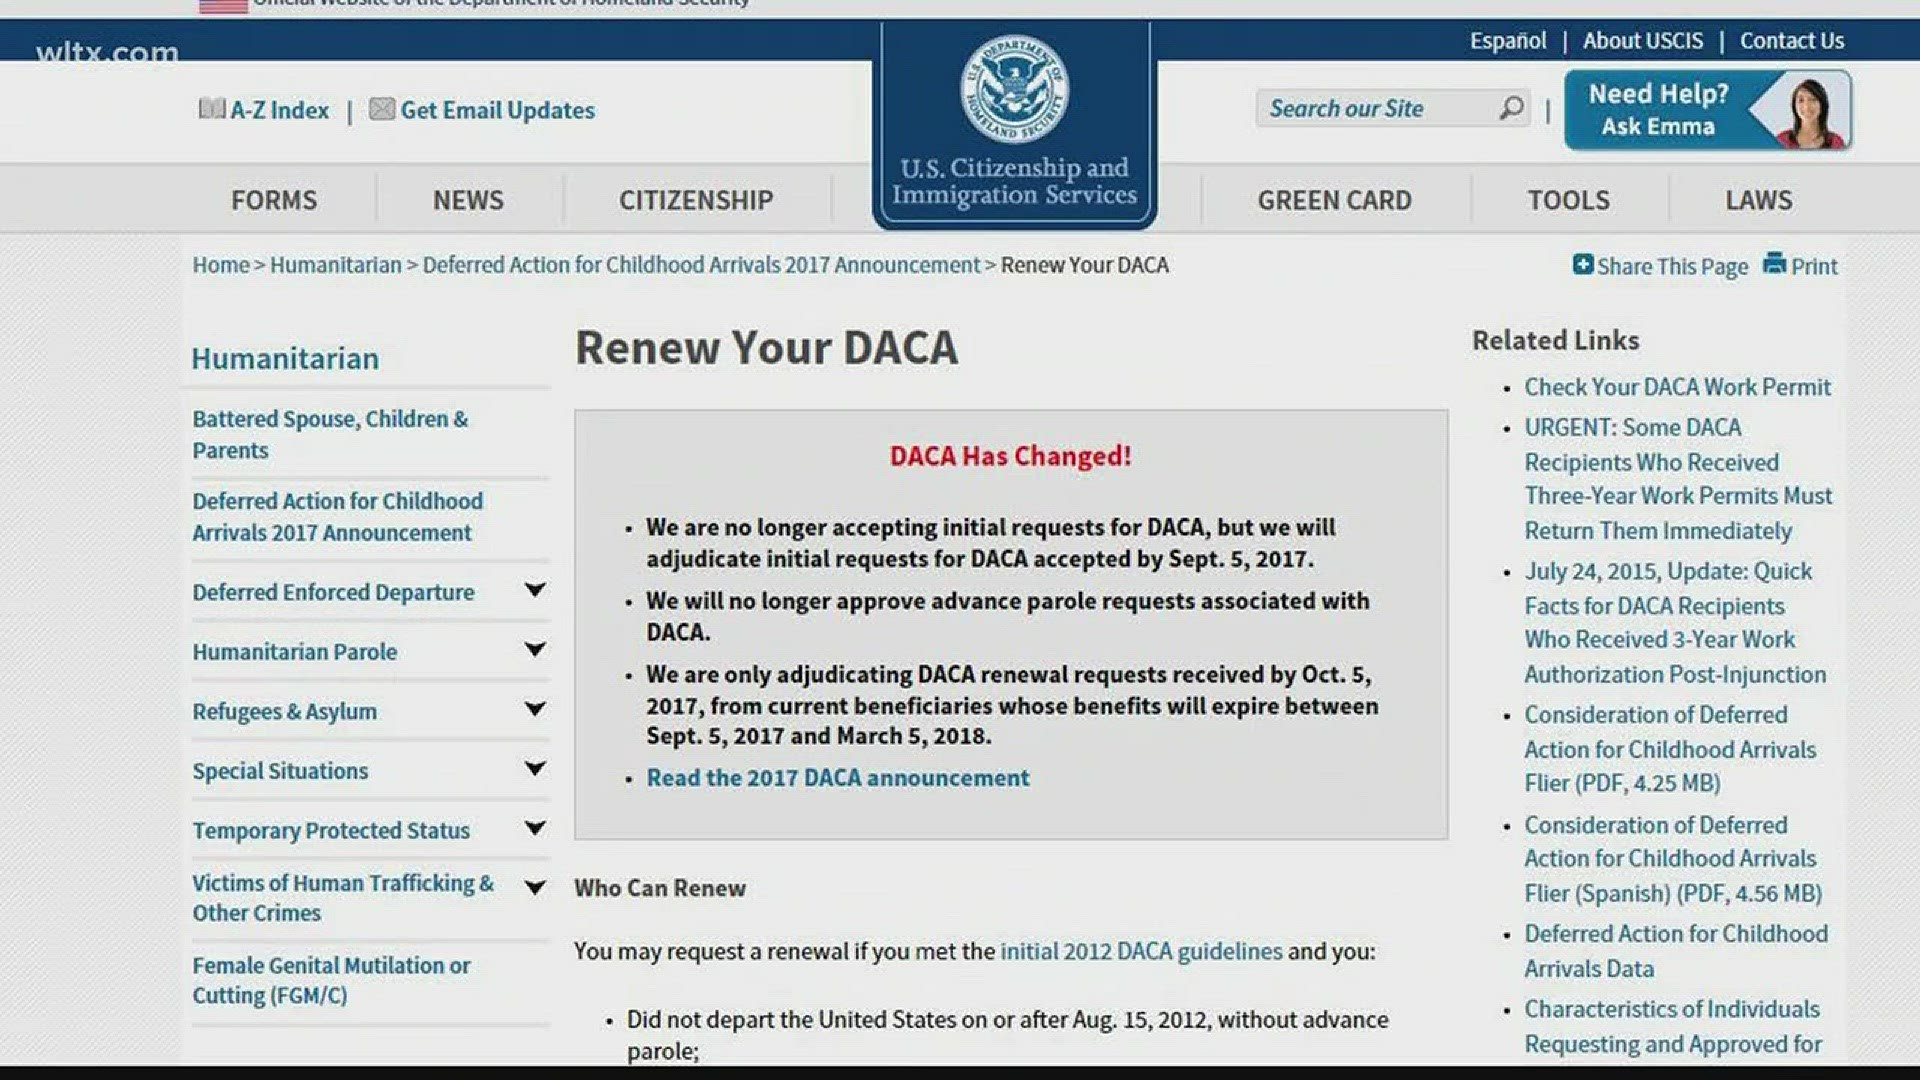 New applicants can be accepted into the DACA program starting Monday, January 15.